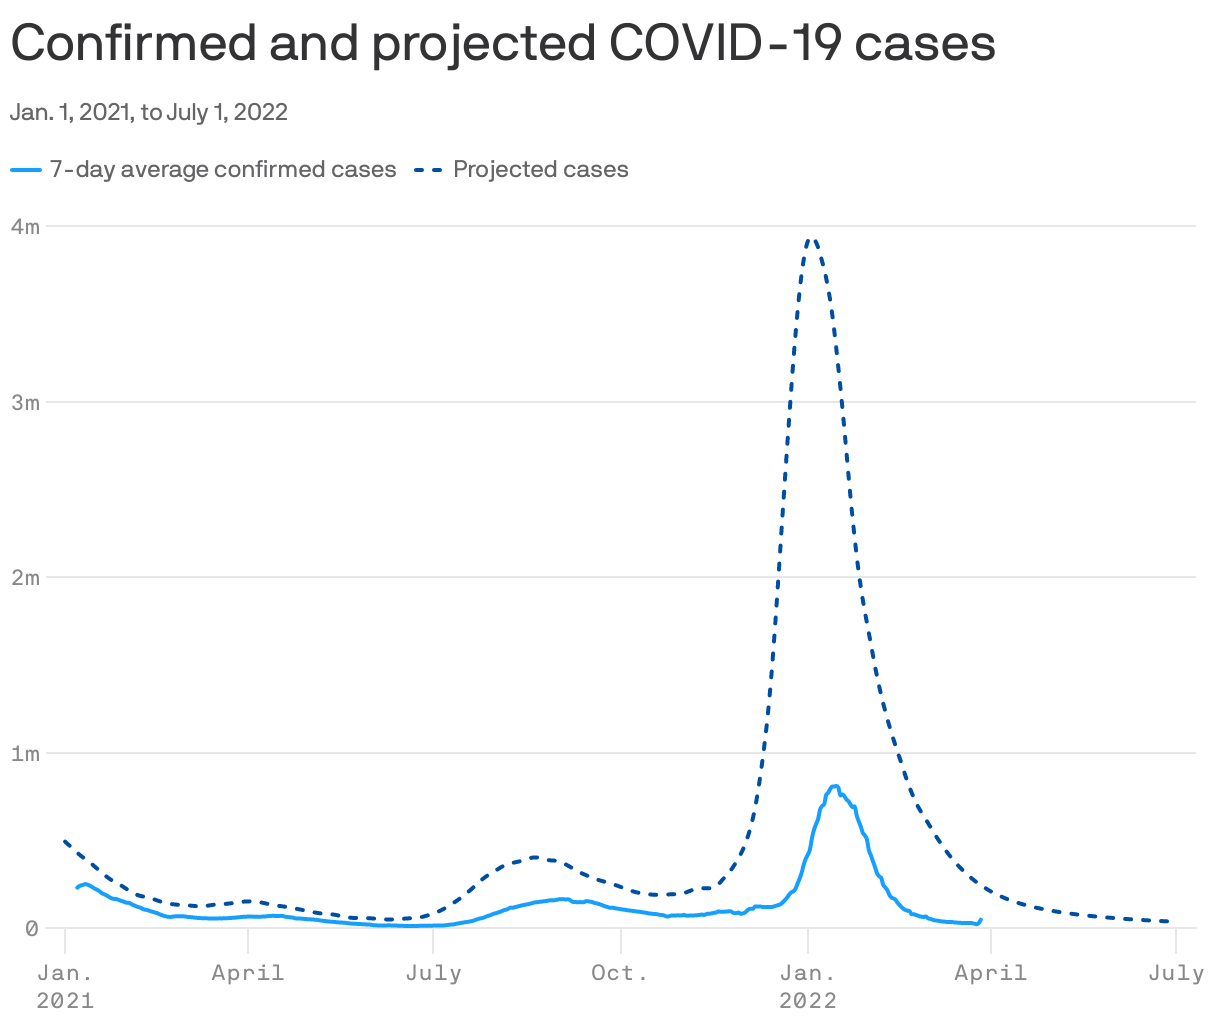 Confirmed and projected COVID-19 cases